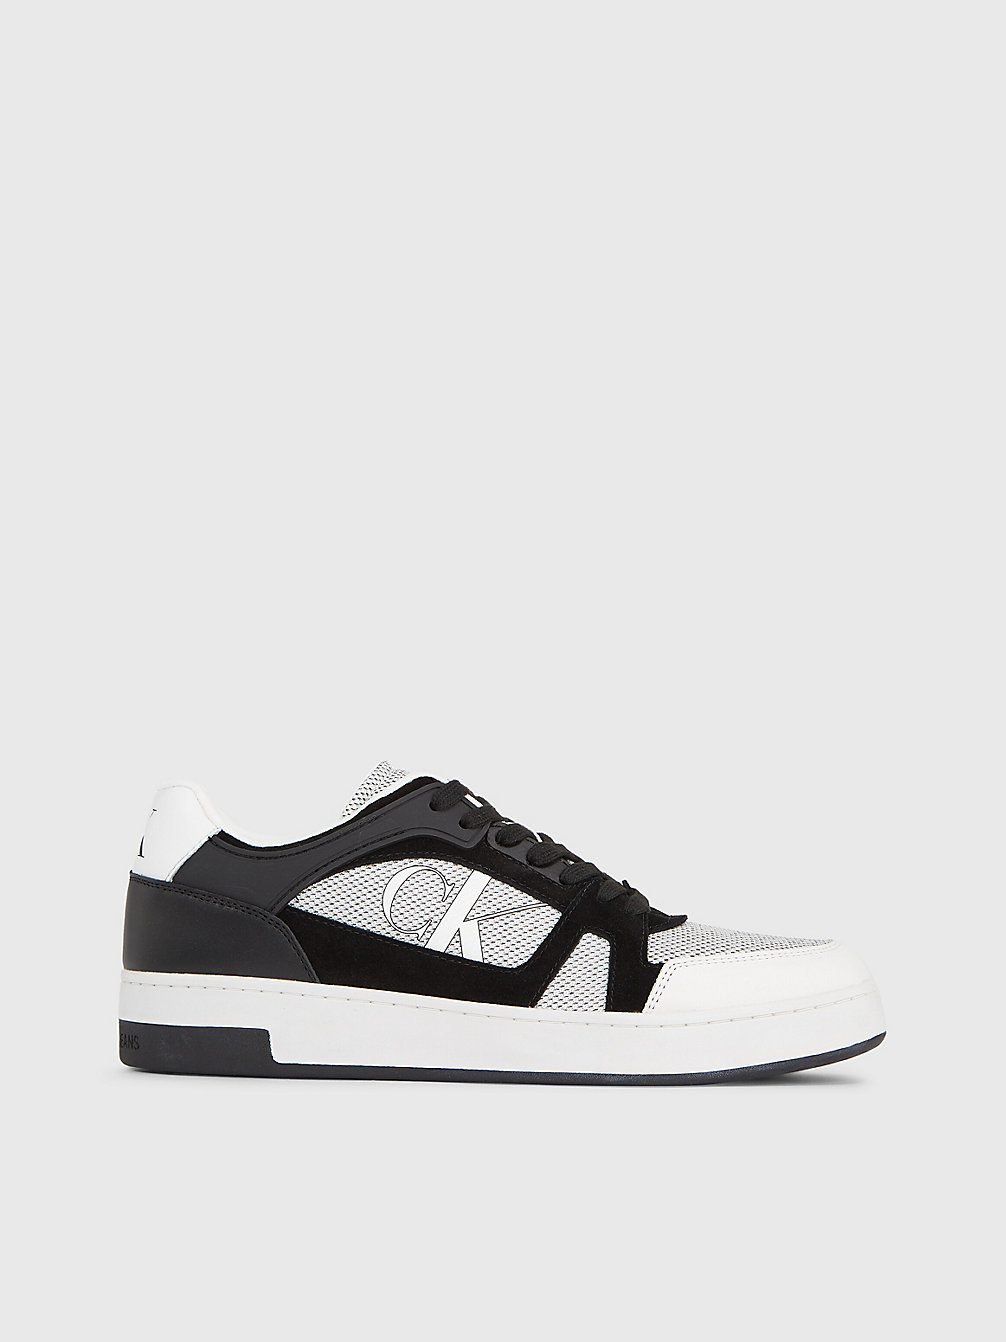 BRIGHT WHITE Leather Trainers undefined men Calvin Klein